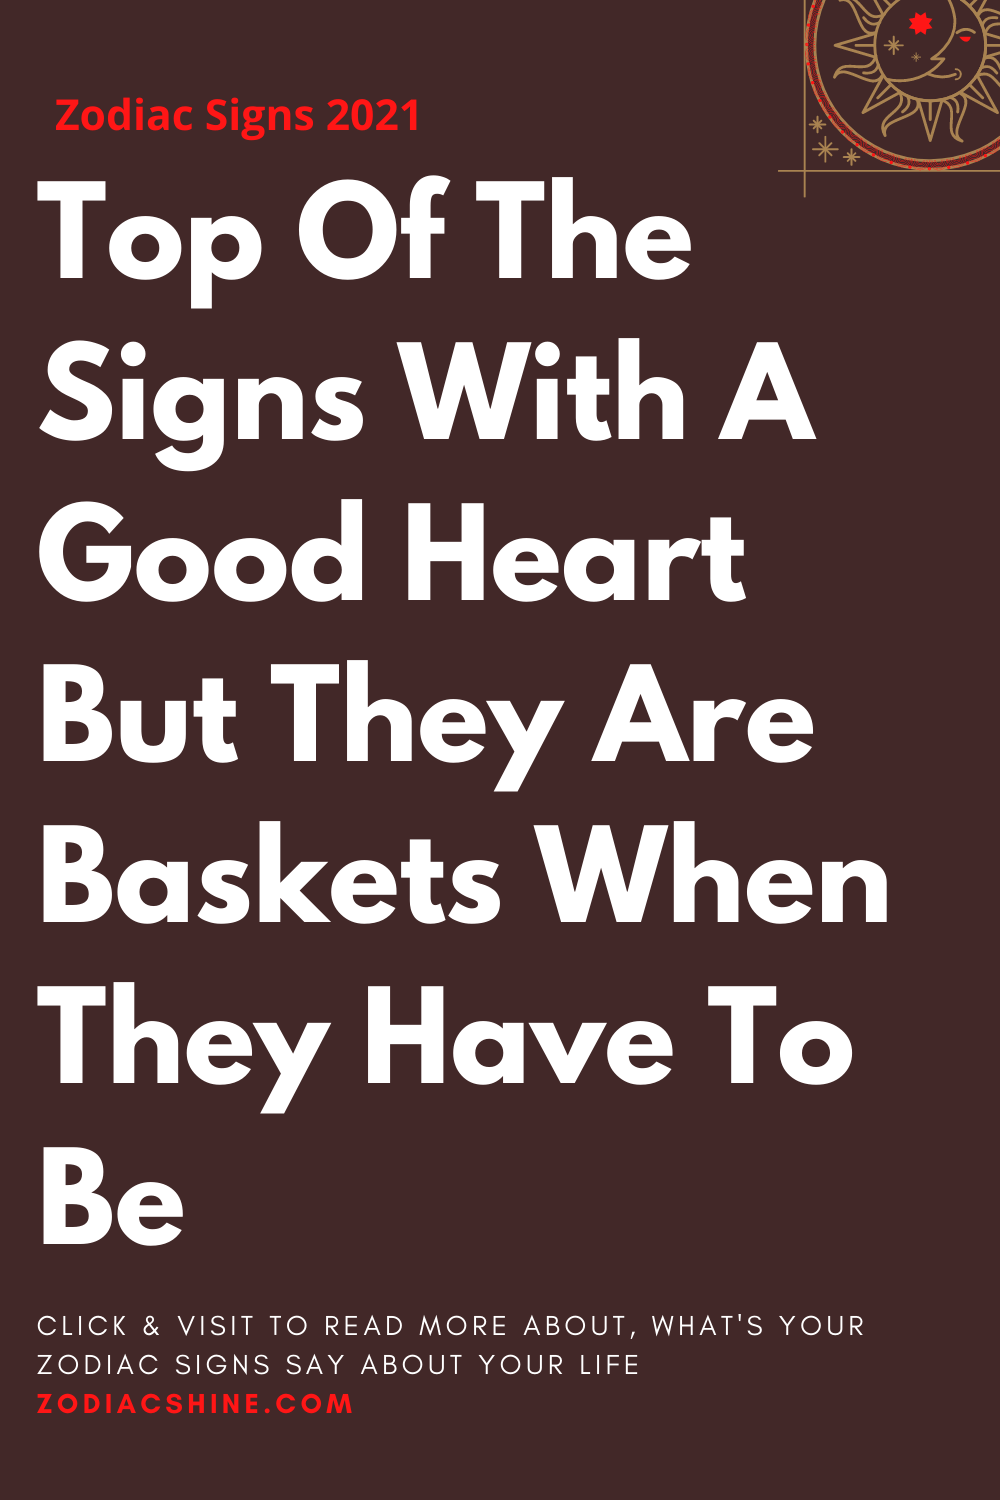 Top Of The Signs With A Good Heart But They Are Baskets When They Have To Be